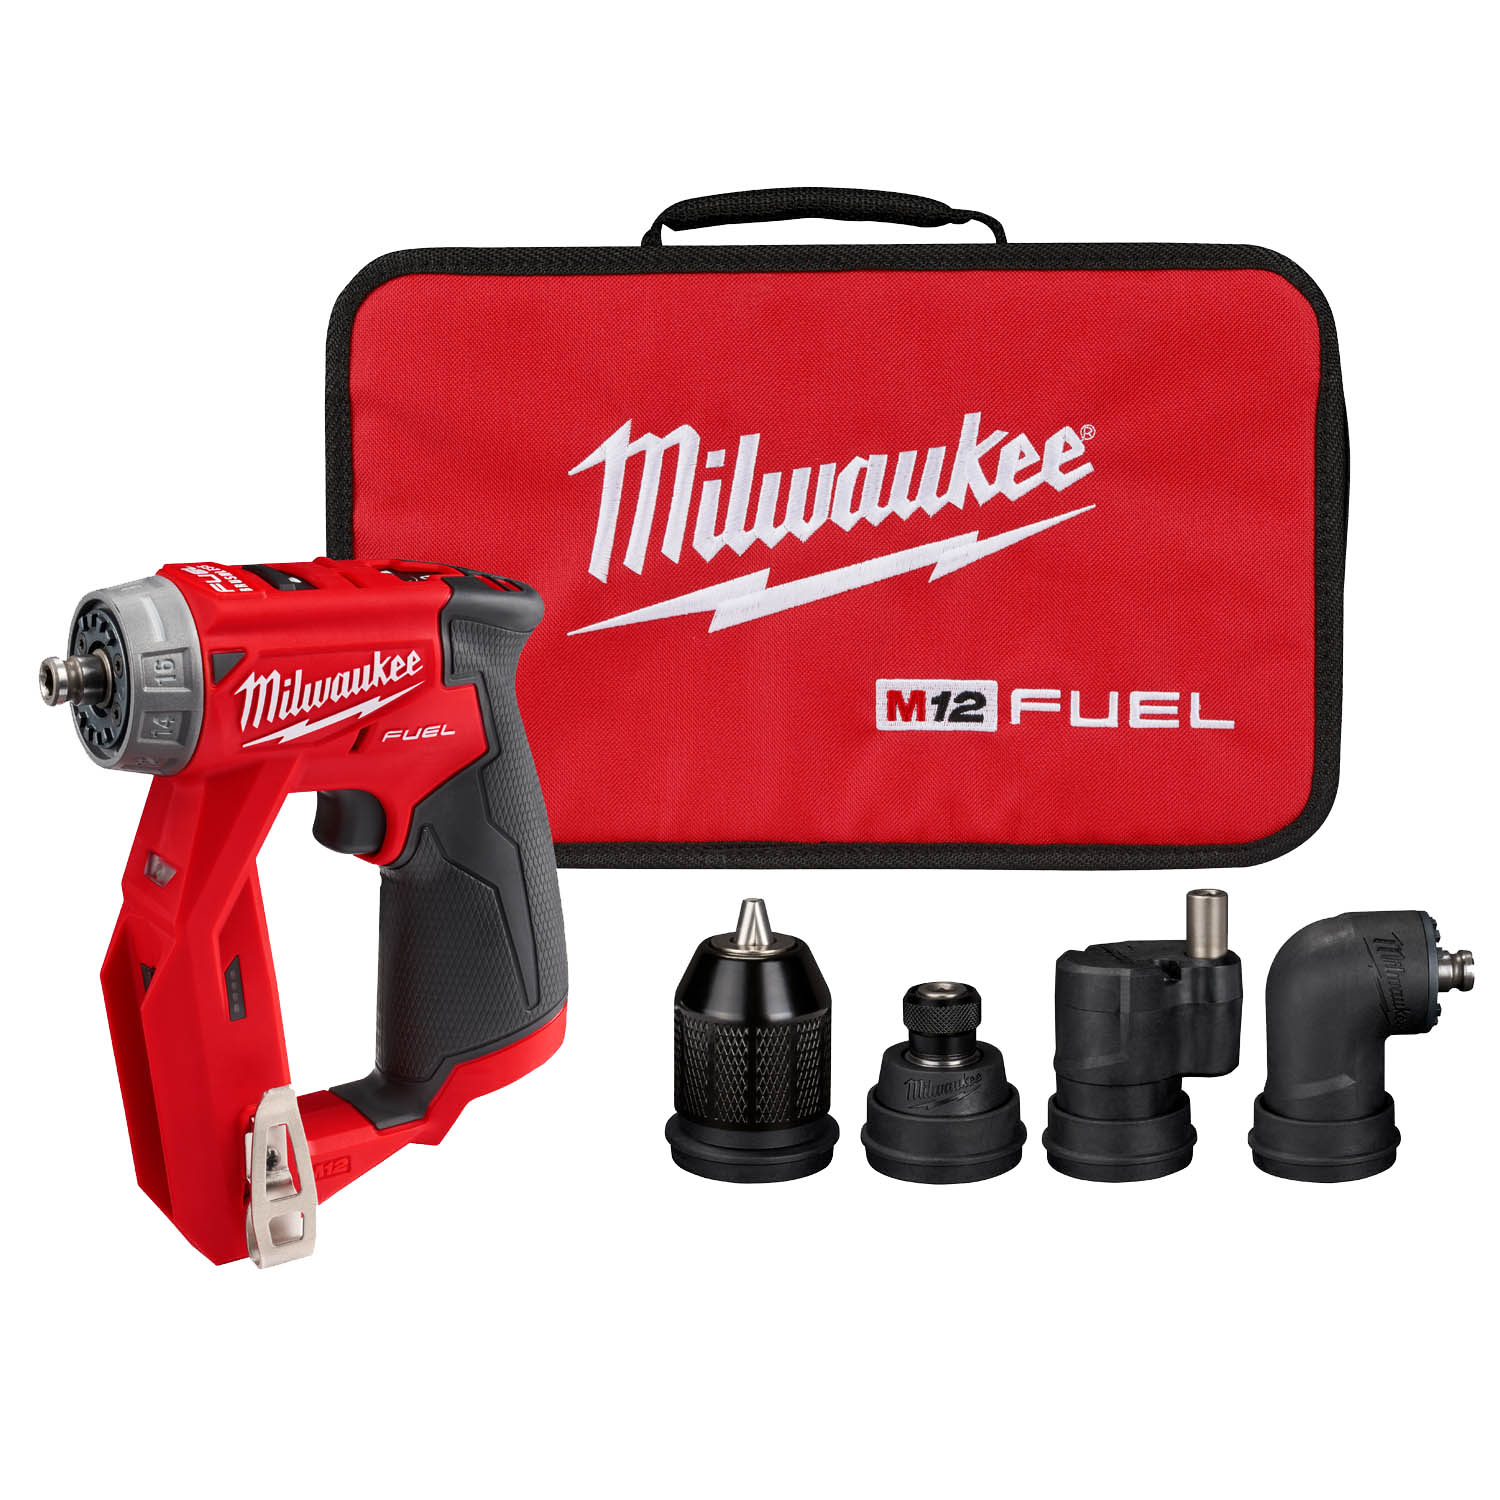 M12 FUEL INSTALLATION DRILL/DRIVER (TOOL ONLY)